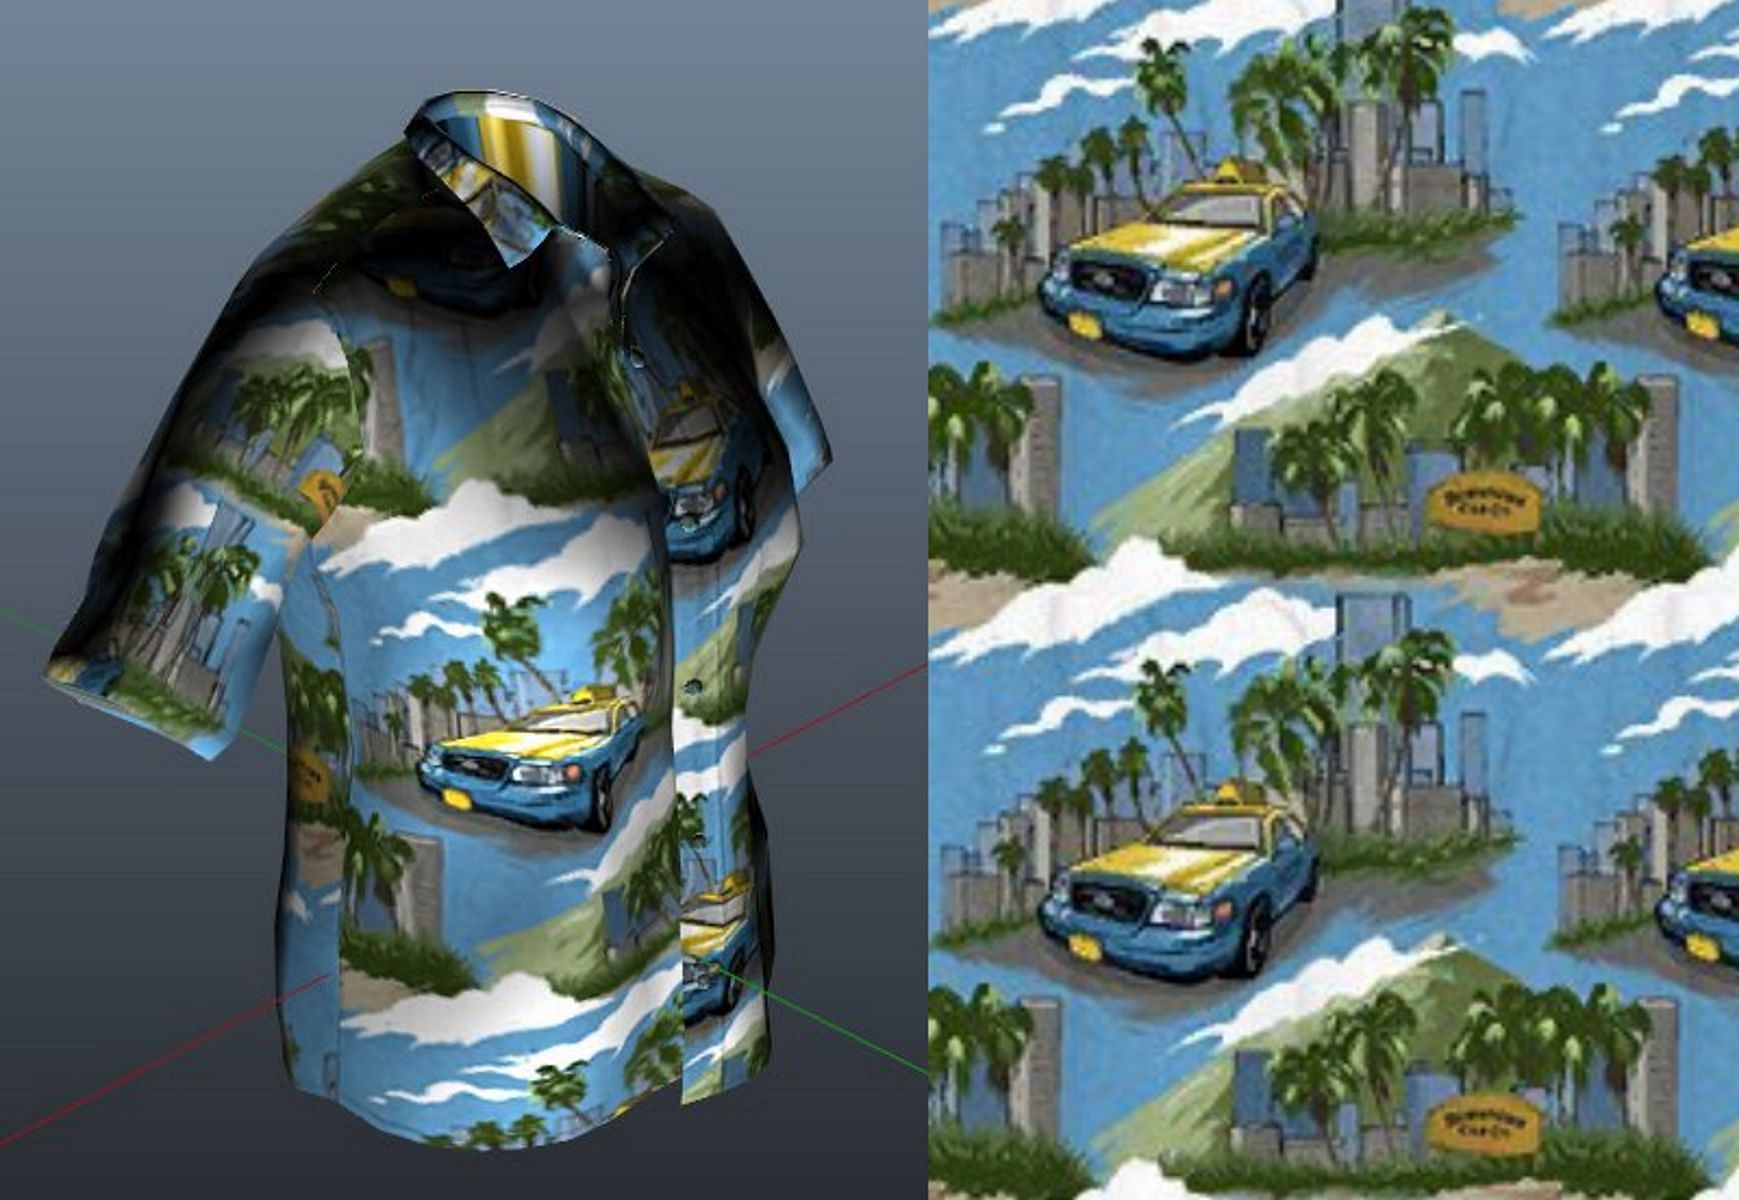 Some fans speculate that this shirt shows Vice City in the background (Image via Rockstar Universe)